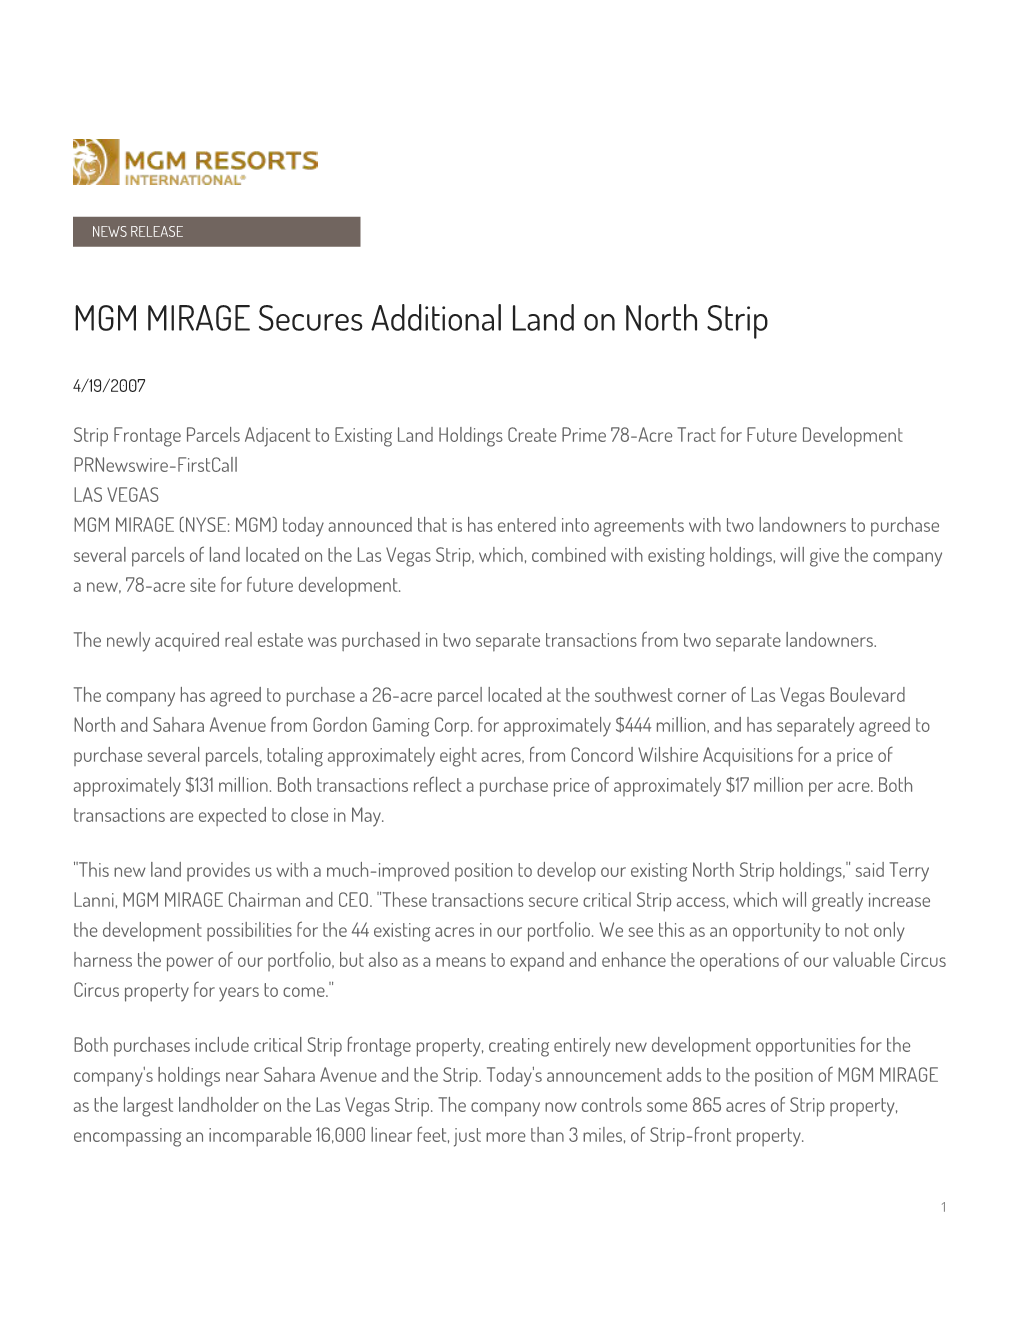 MGM MIRAGE Secures Additional Land on North Strip